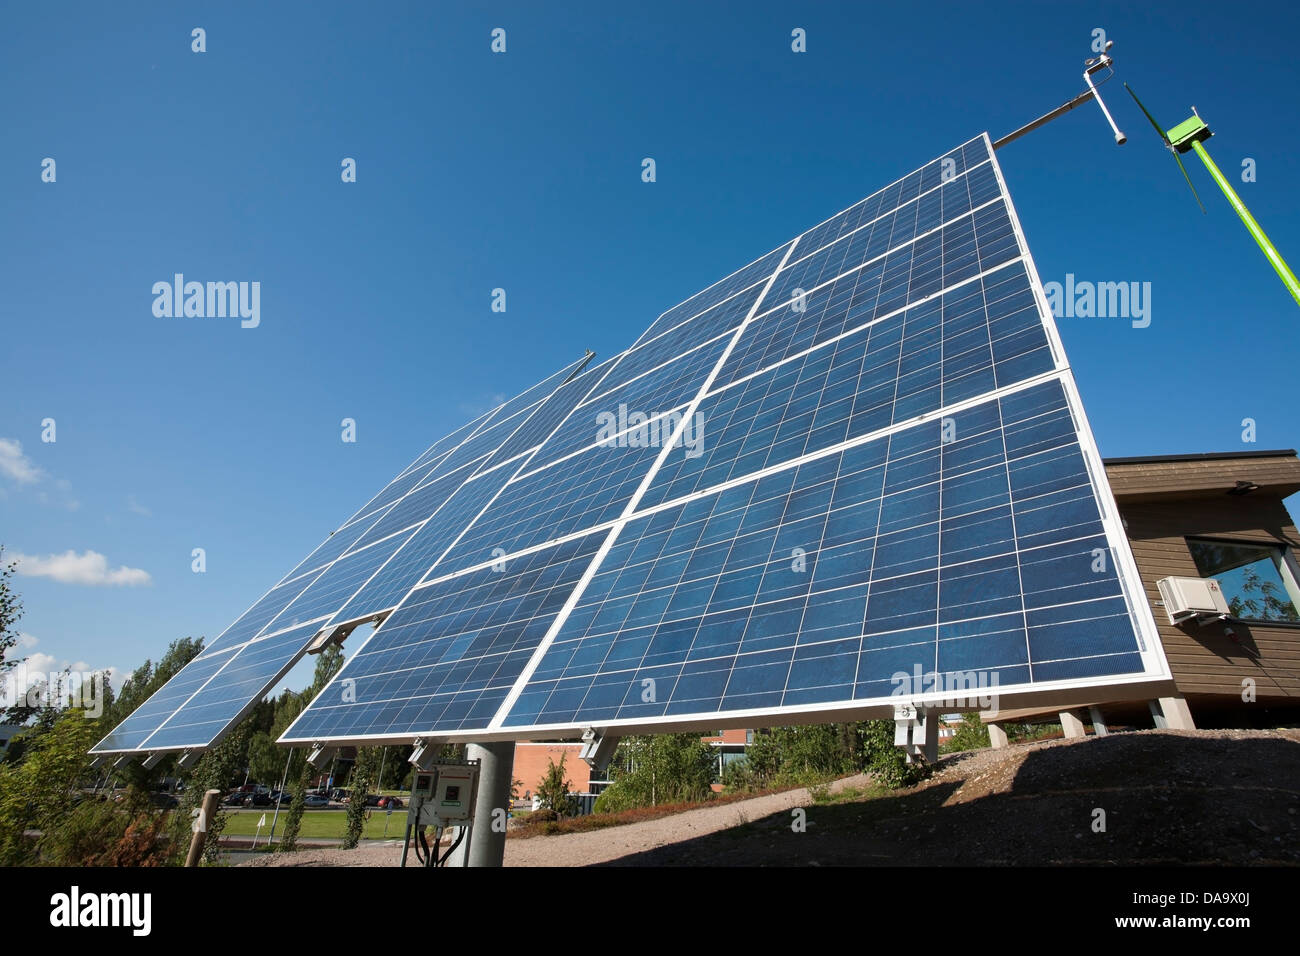 solar panels for electricity production, Lappeenranta Finland Stock Photo